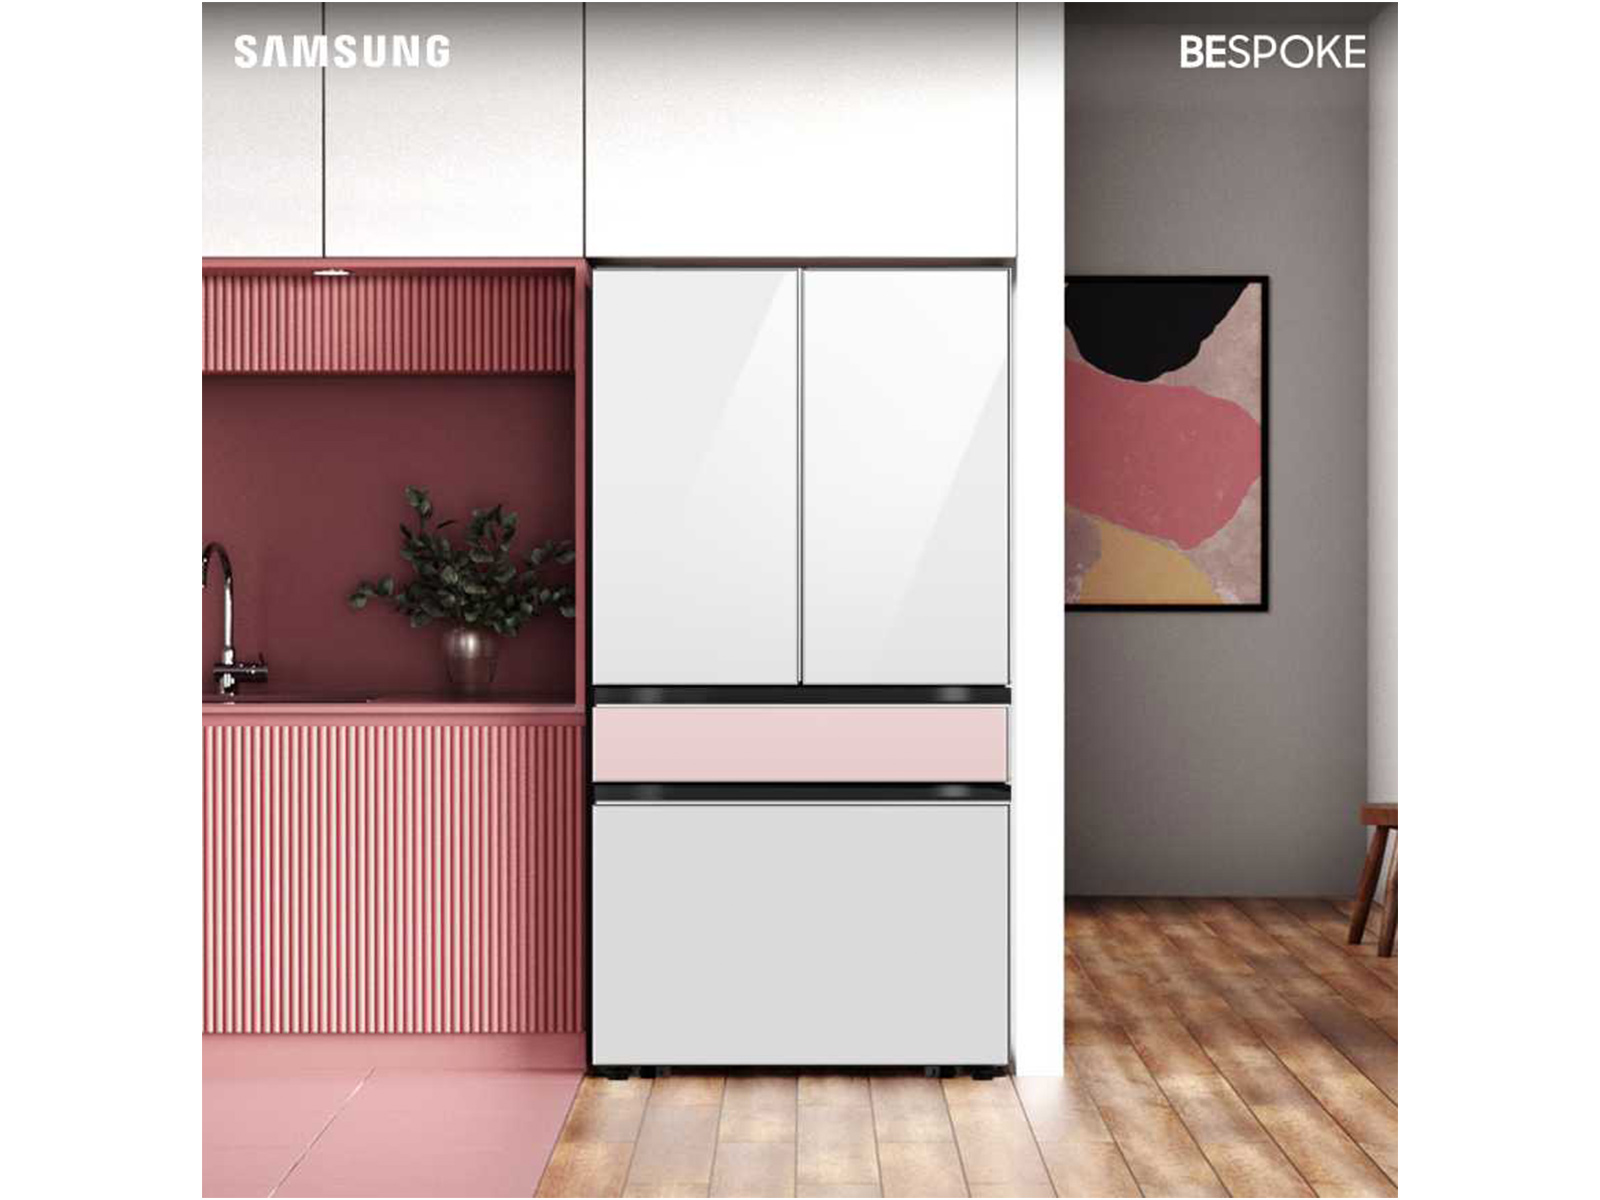 Thumbnail image of Bespoke 4-Door French Door Refrigerator (23 cu. ft.) with AutoFill Water Pitcher and Customizable Door Panel Colors&nbsp;in White Glass with Pink Glass Middle Panel